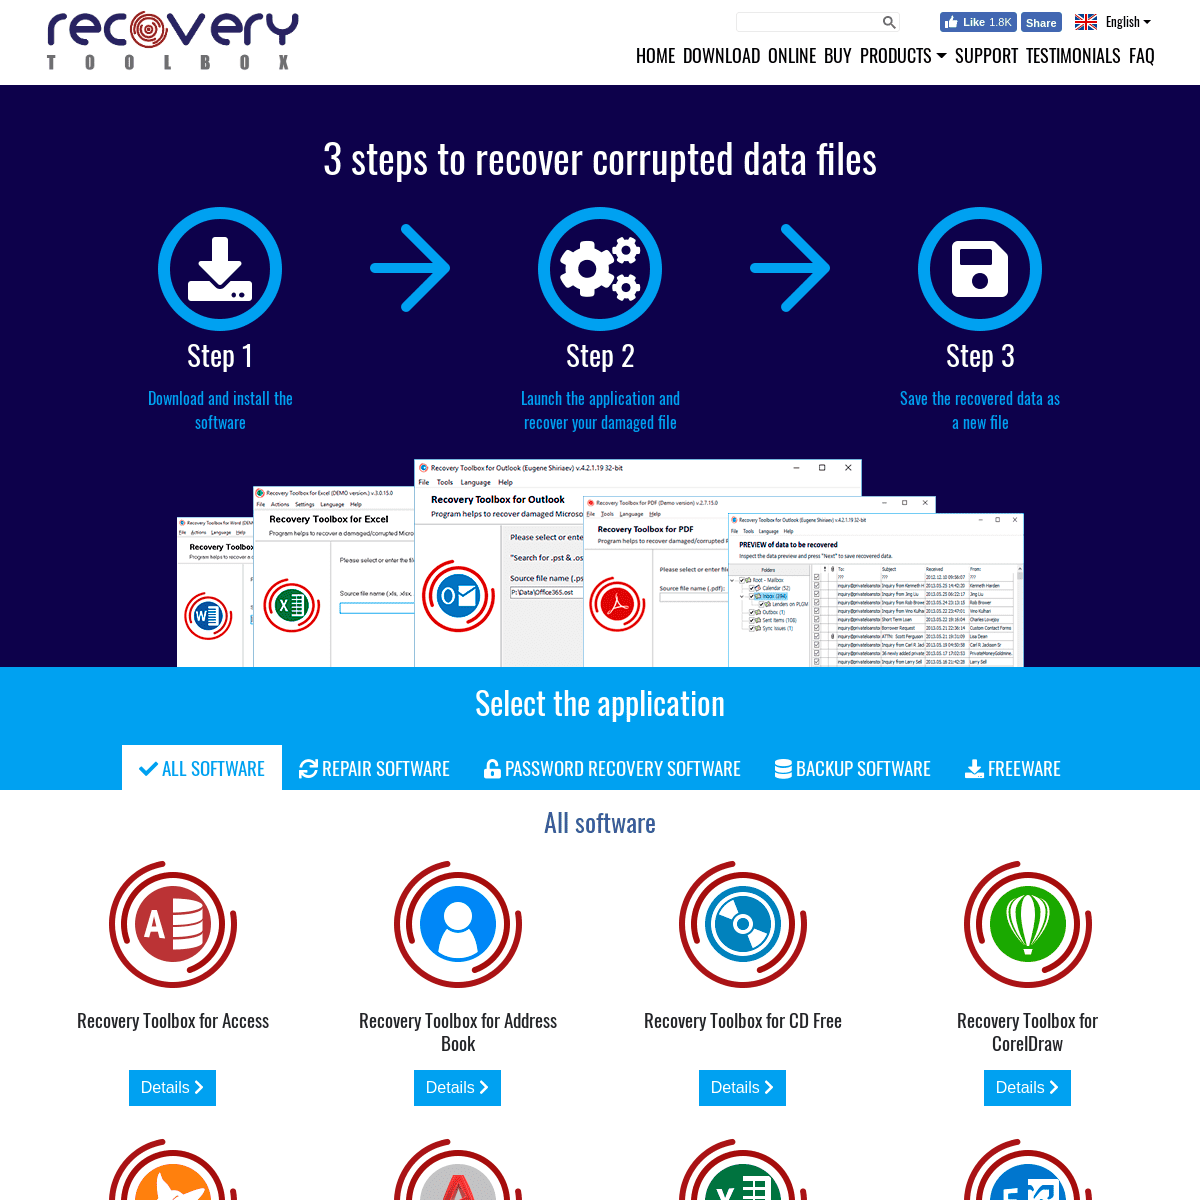 Recovery Toolbox, Inc. - Independent Software Vendor of recovery tools for corrupted files